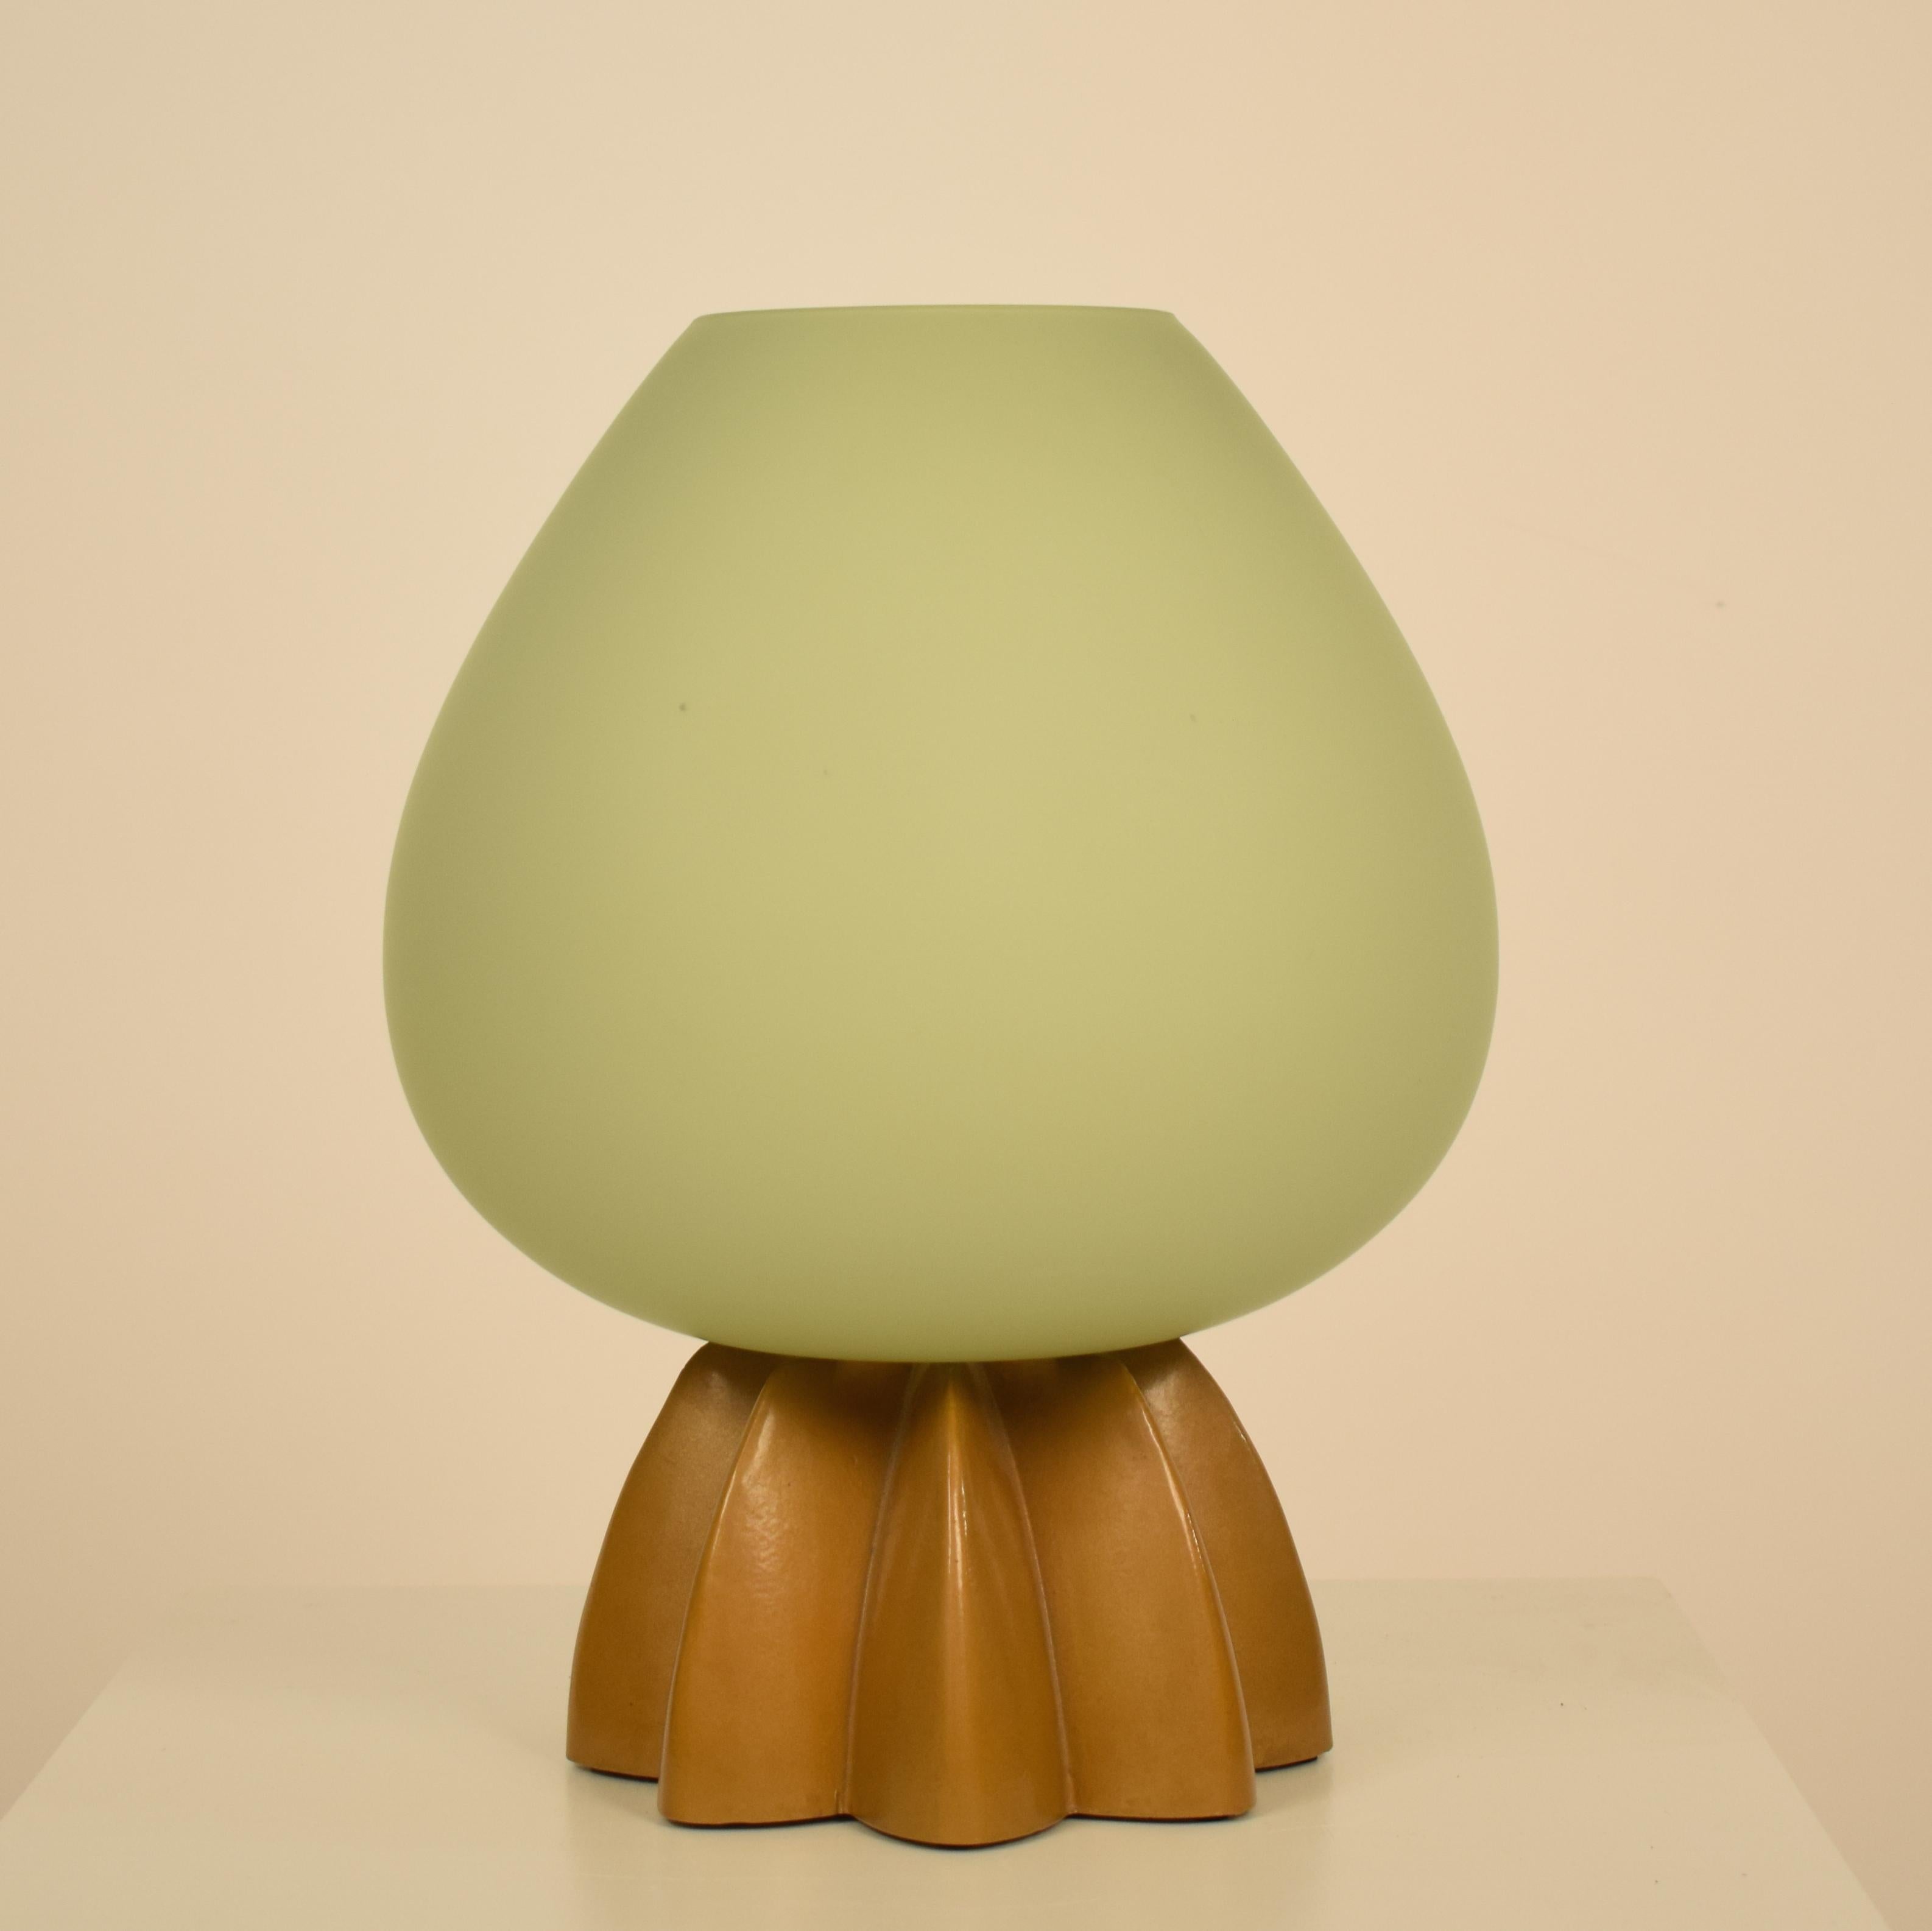 This beautiful 1980s Italian Memphis style table lamp is made out of Murano glass and the base is lacquered metal.
The Murano glass is light green and shines golden when it is lighted.
The base made out metal and lacquered gold.
A unique piece which